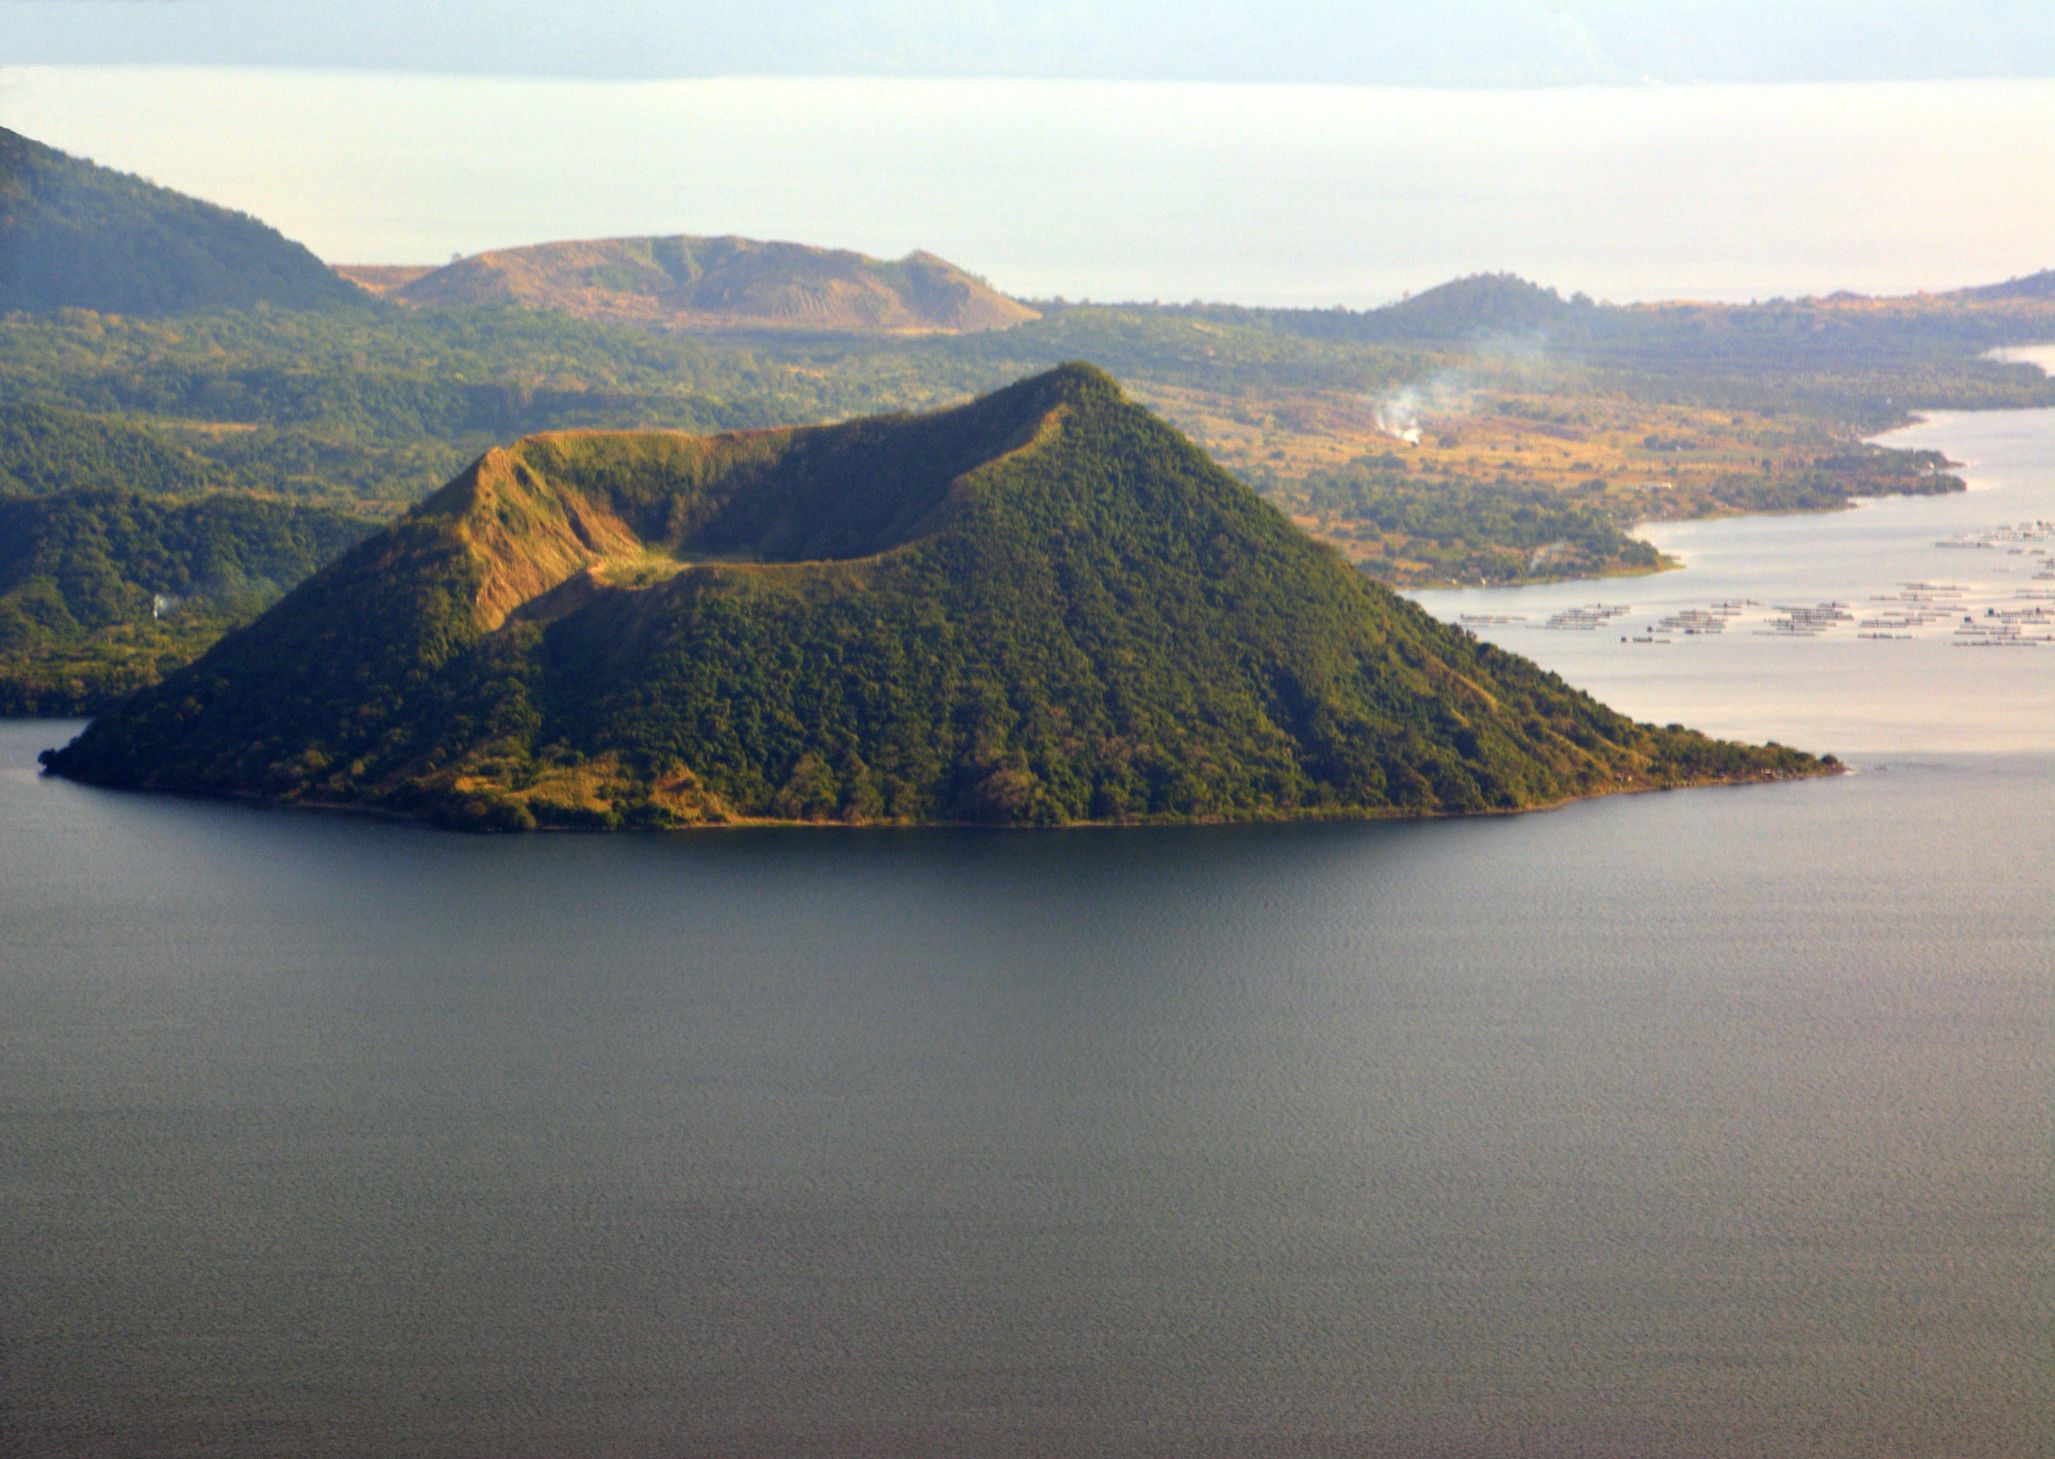 <p><b>Philippines<br>Elevation:</b> 1,020 feet<br>The Taal Volcano is one of the most active volcanoes in the Philippines. It's located on the island of Luzon, and has been active for over 200 years. The last major eruption <a href="https://www.nationalgeographic.com/travel/article/how-philippines-taal-volcano-eruptions-impact-travel">was in 2020</a>, but tours still operate to the volcano and adjacent lake, where visitors can walk along the hardened black lava to the rim of the crater.    </p>